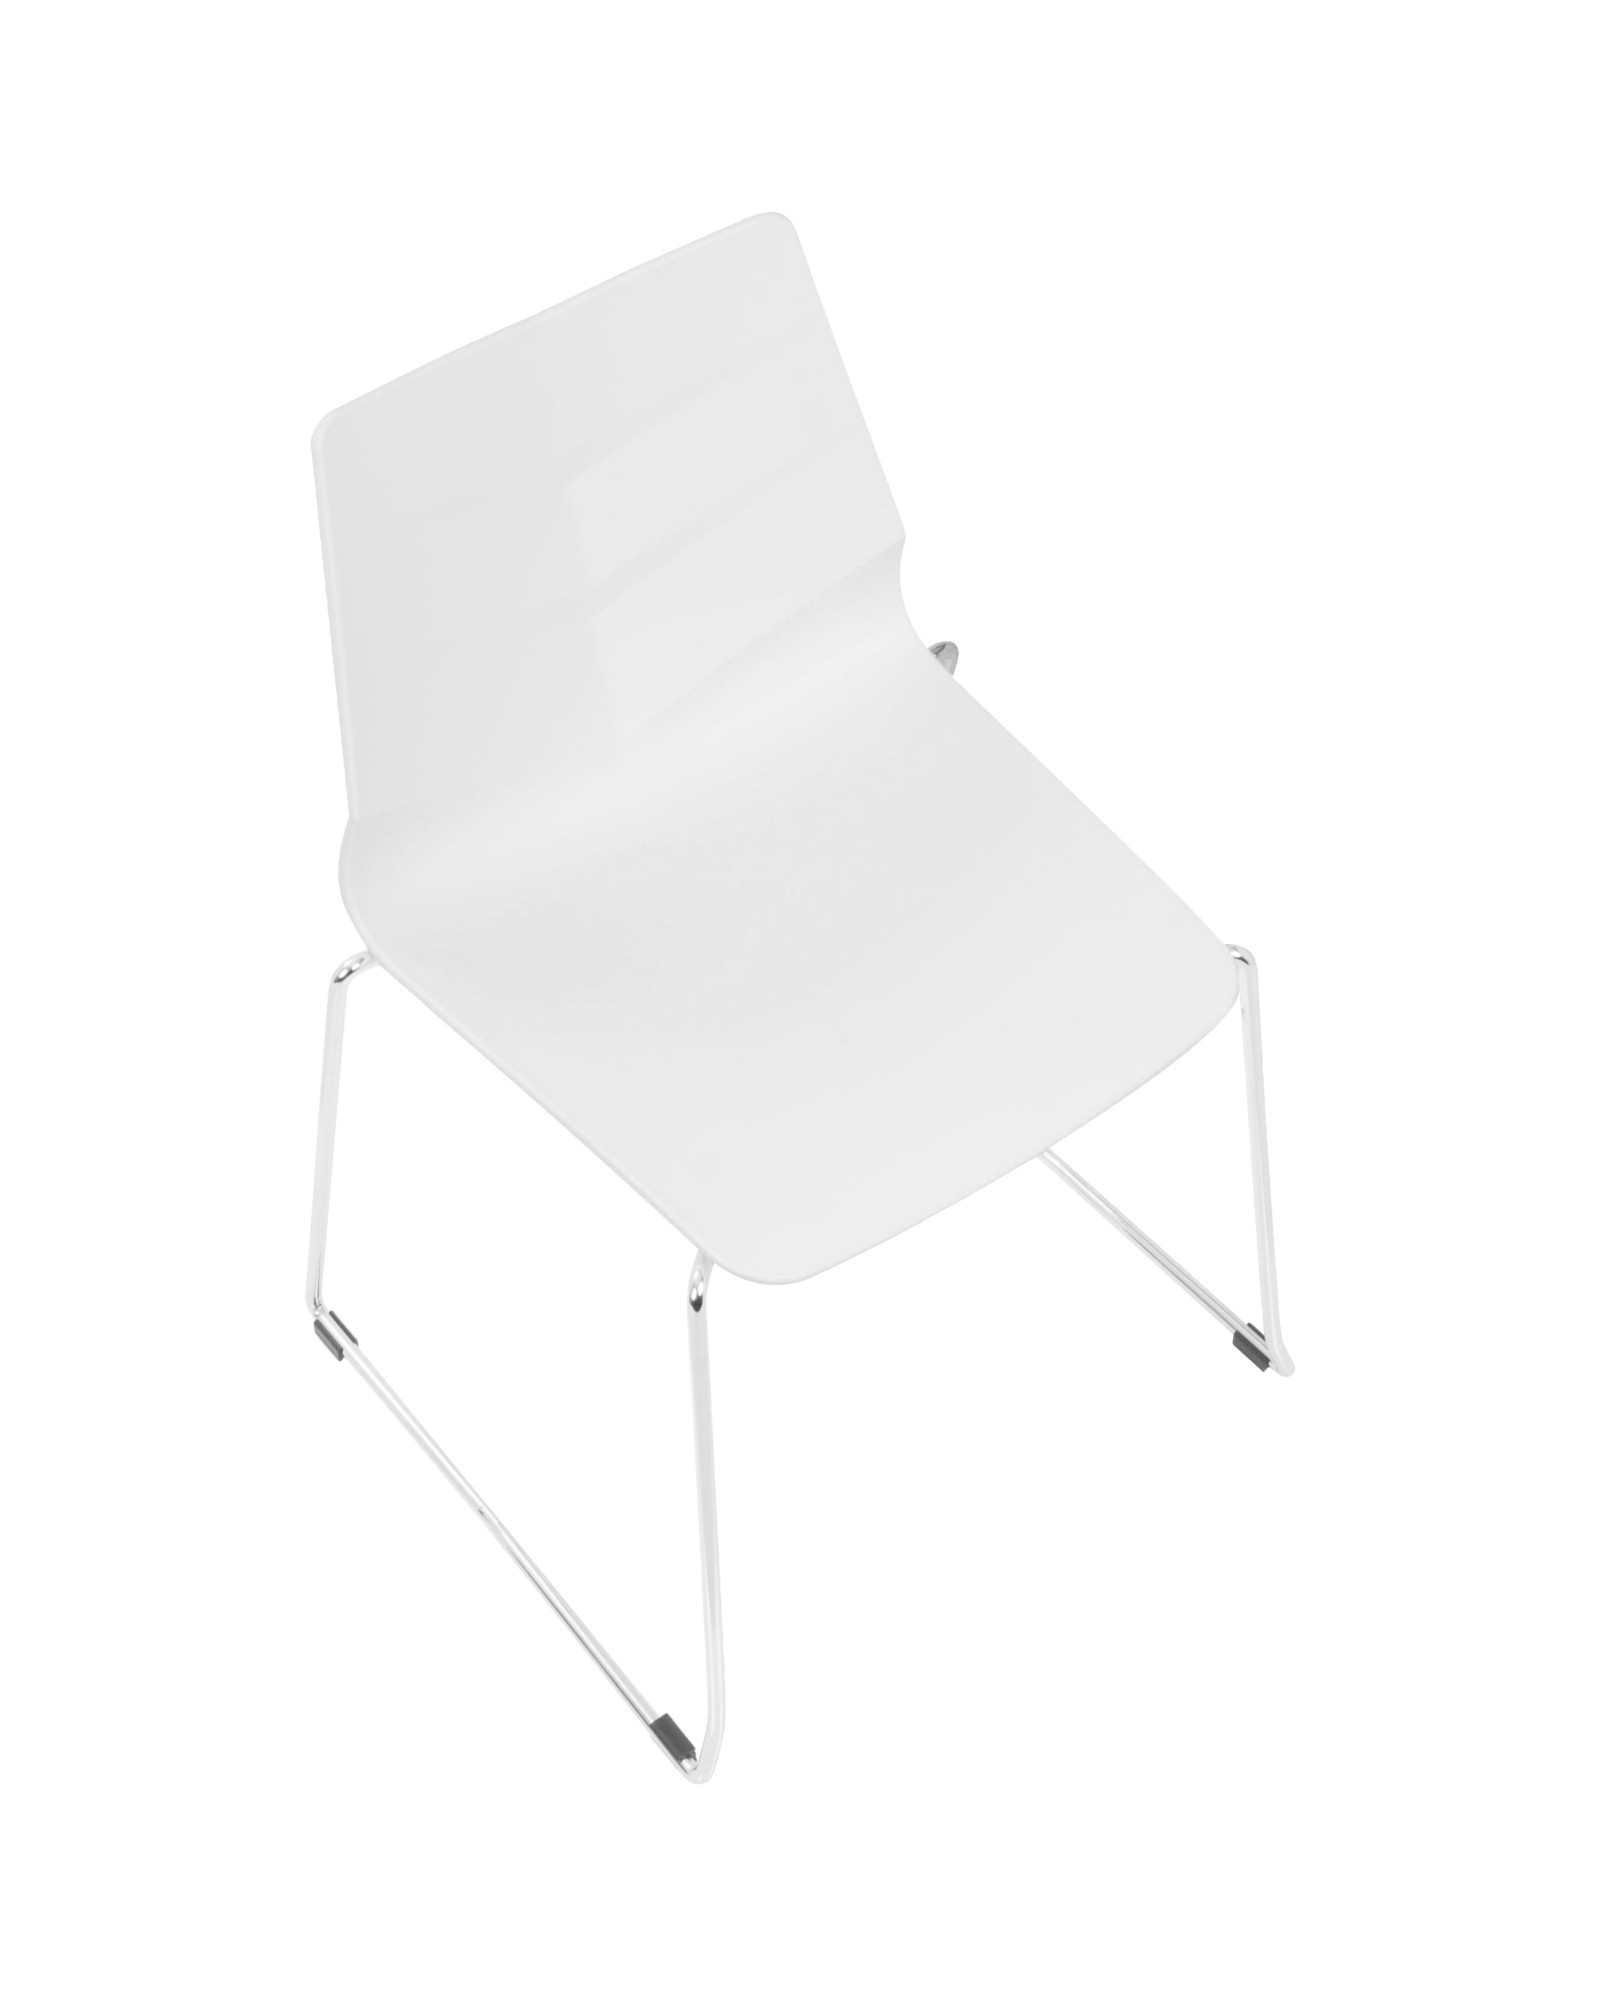 Arrow Contemporary Dining Chair in White - Set of 2